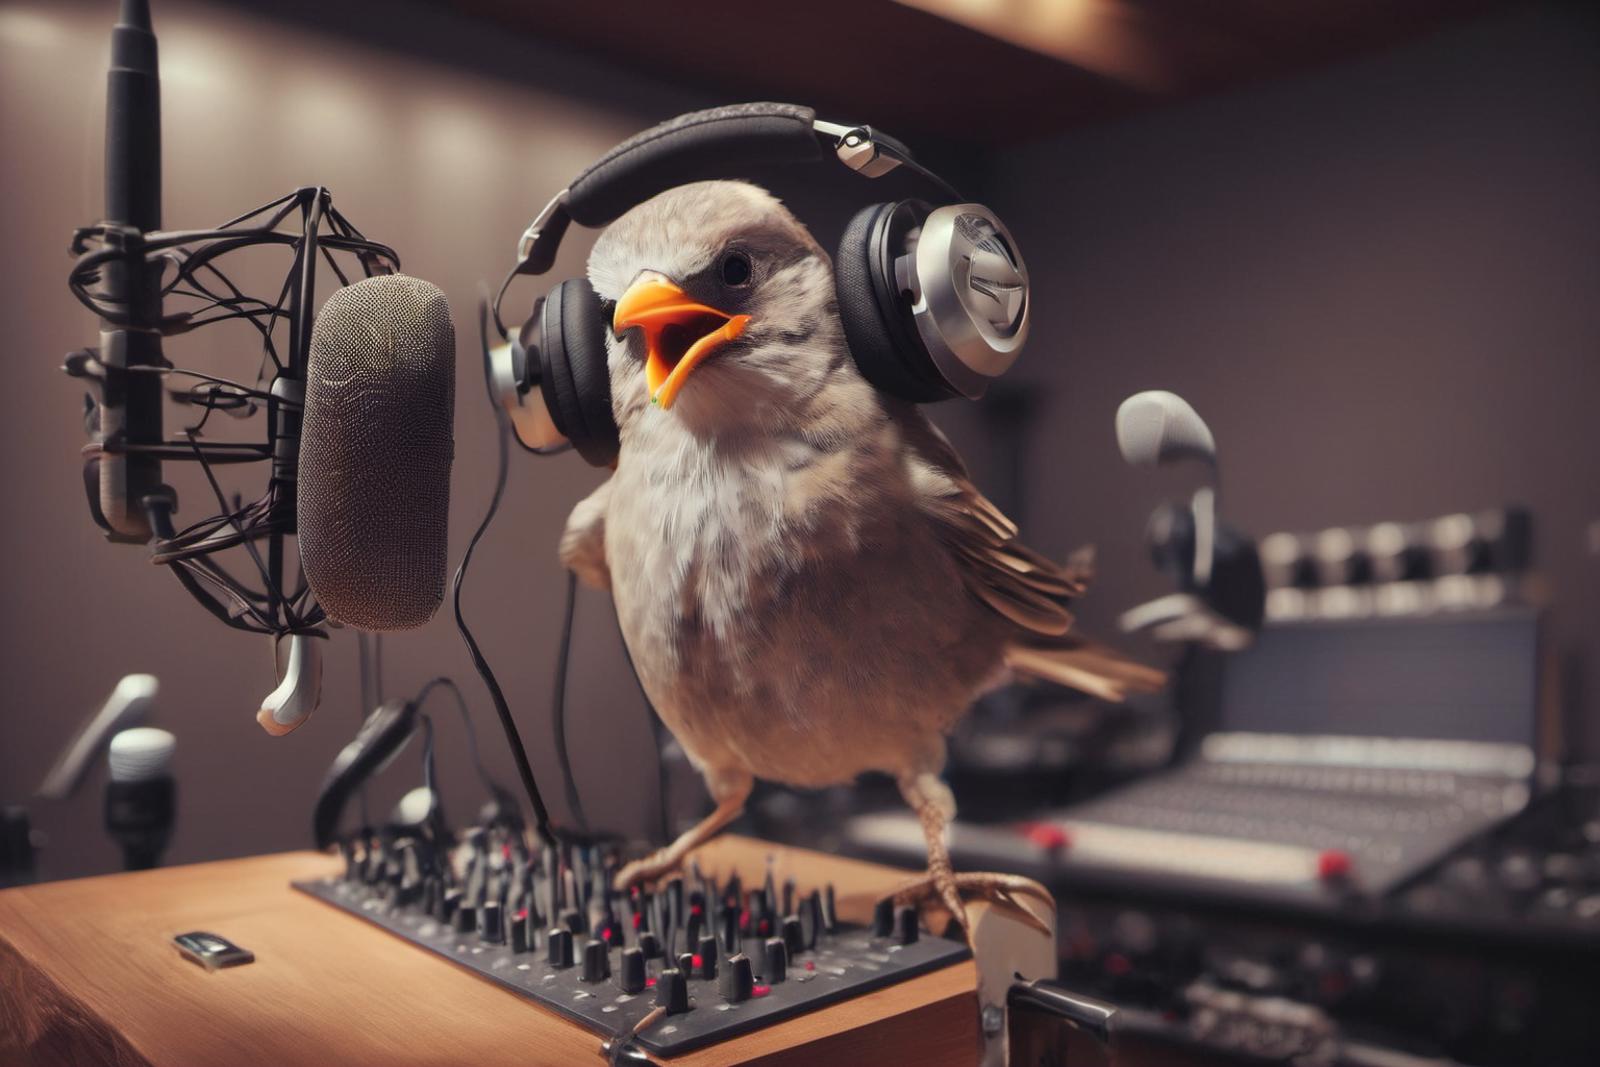 A small bird, likely a canary, is perched on a soundboard with headphones placed on its head. The bird appears to be singing or mimicking a human voice. The soundboard is surrounded by various other pieces of equipment, including a microphone, speakers, and a mixing console. The scene suggests that the bird's melodious voice is being recorded or amplified by the soundboard and its accompanying equipment.